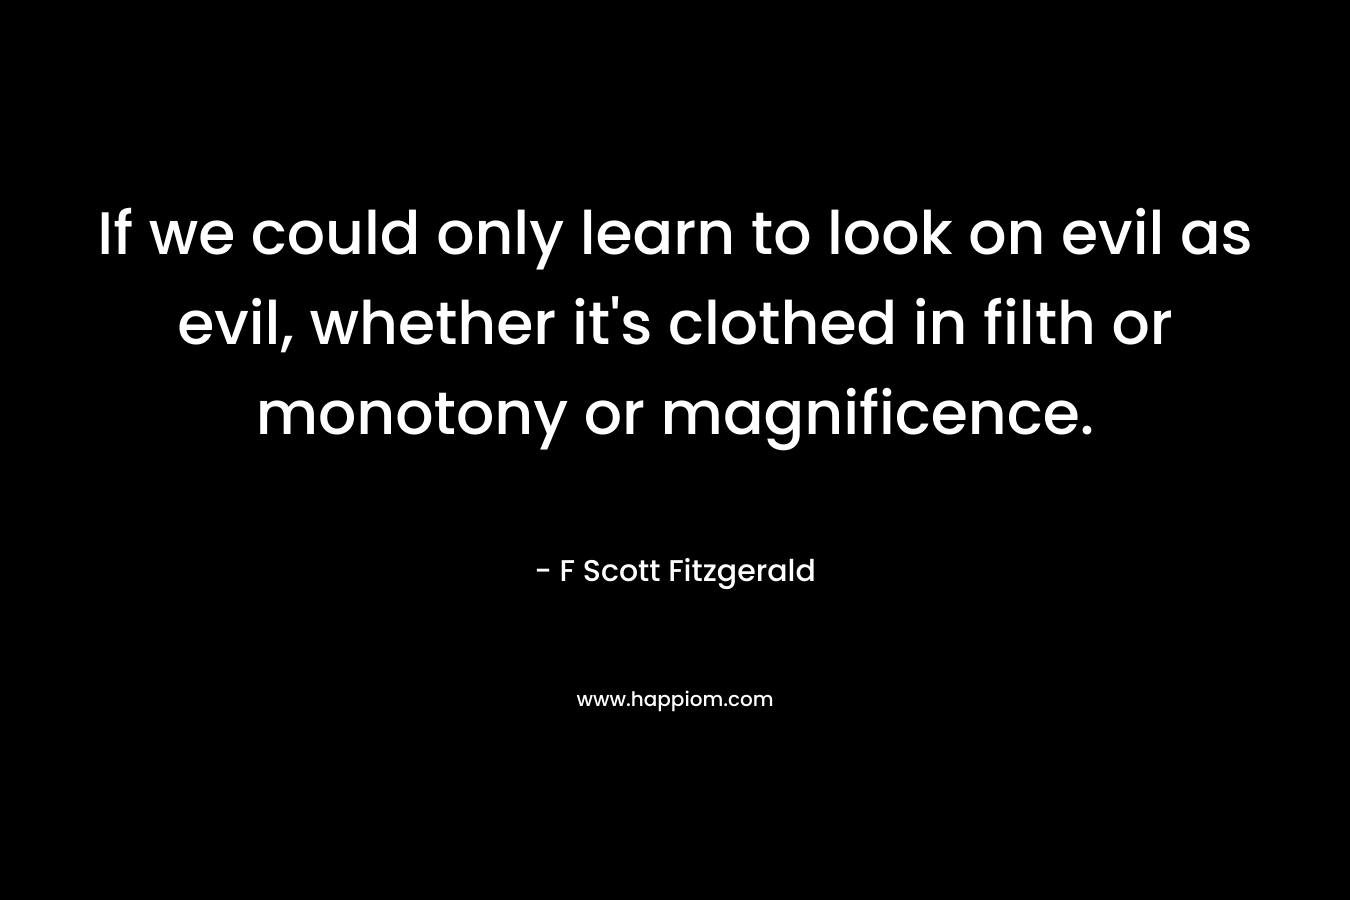 If we could only learn to look on evil as evil, whether it’s clothed in filth or monotony or magnificence. – F Scott Fitzgerald